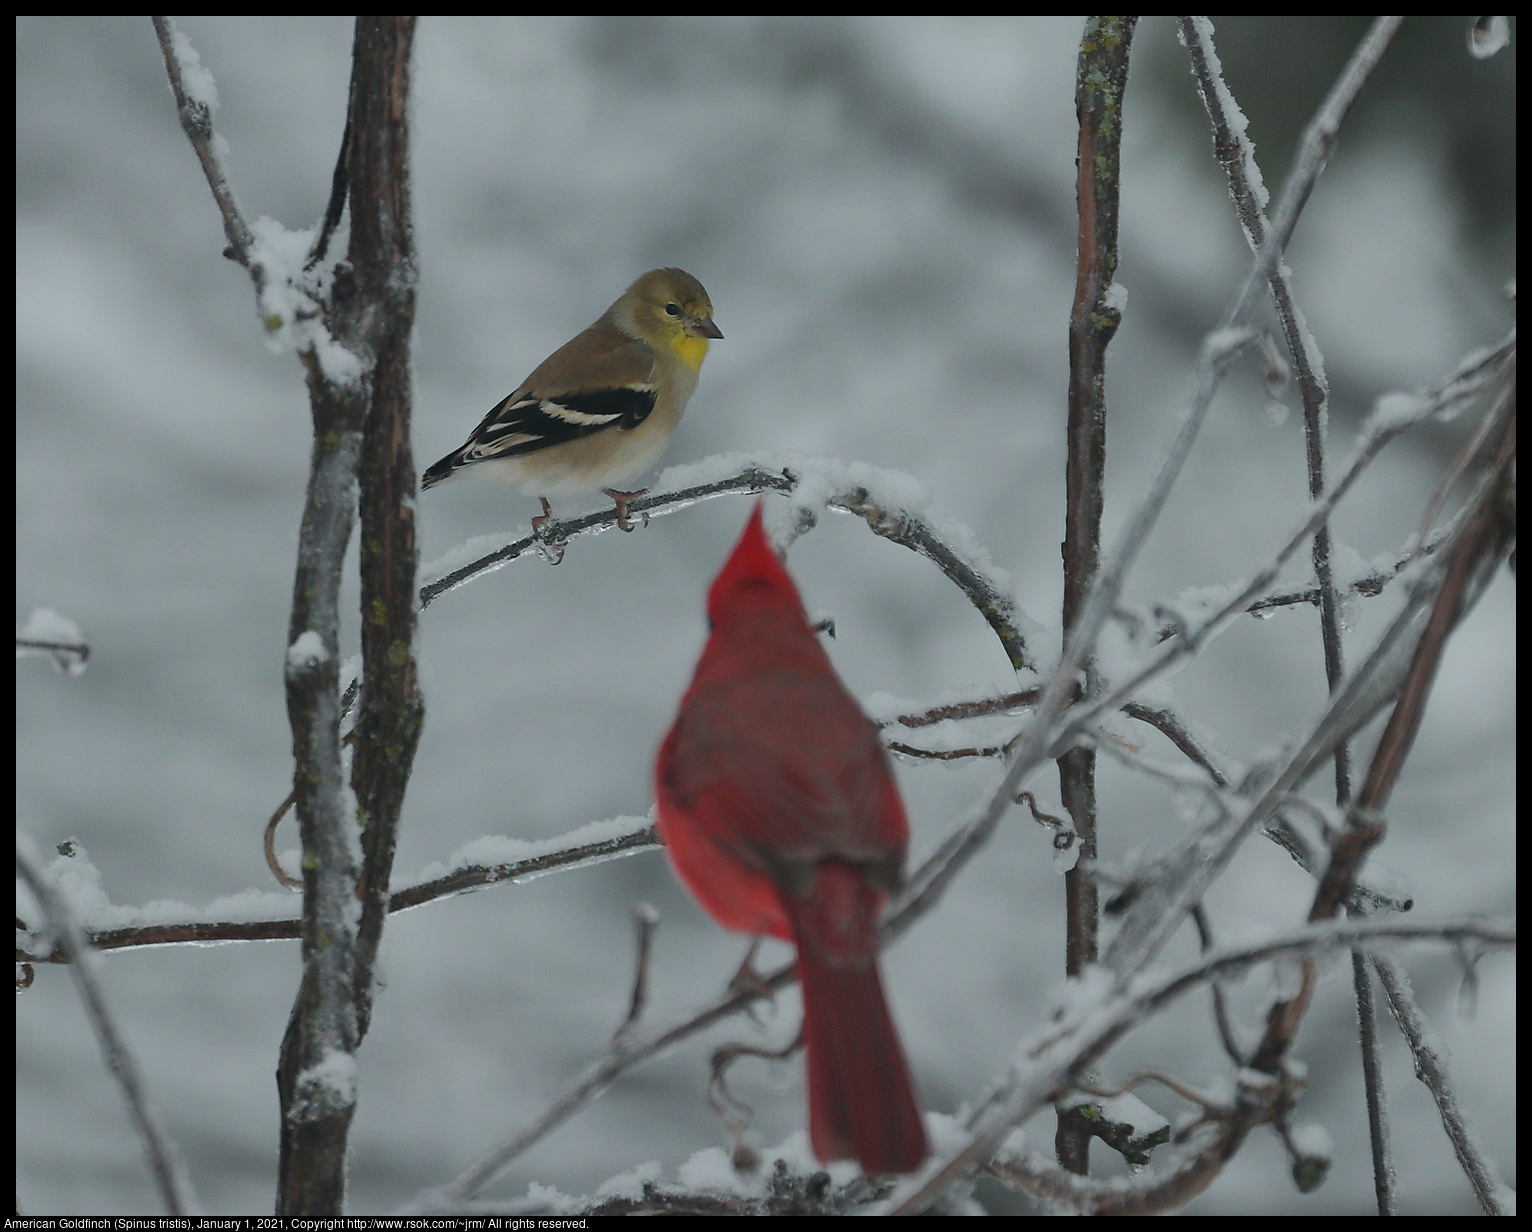 American Goldfinch (Spinus tristis), January 1, 2021